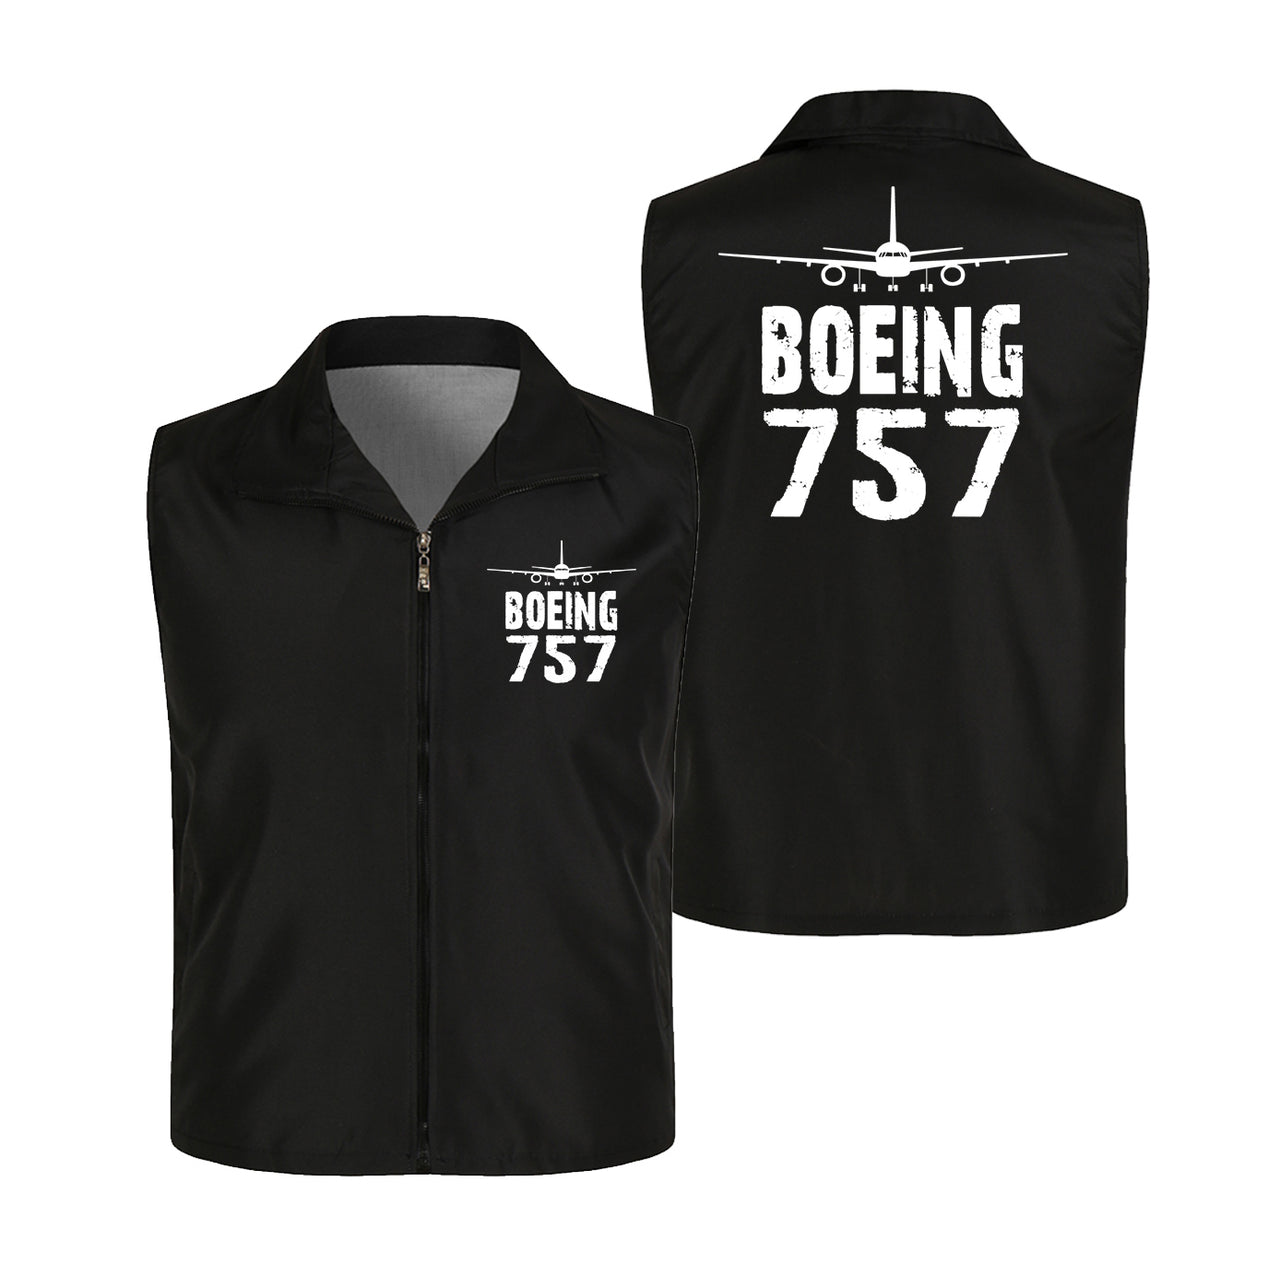 Boeing 757 & Plane Designed Thin Style Vests